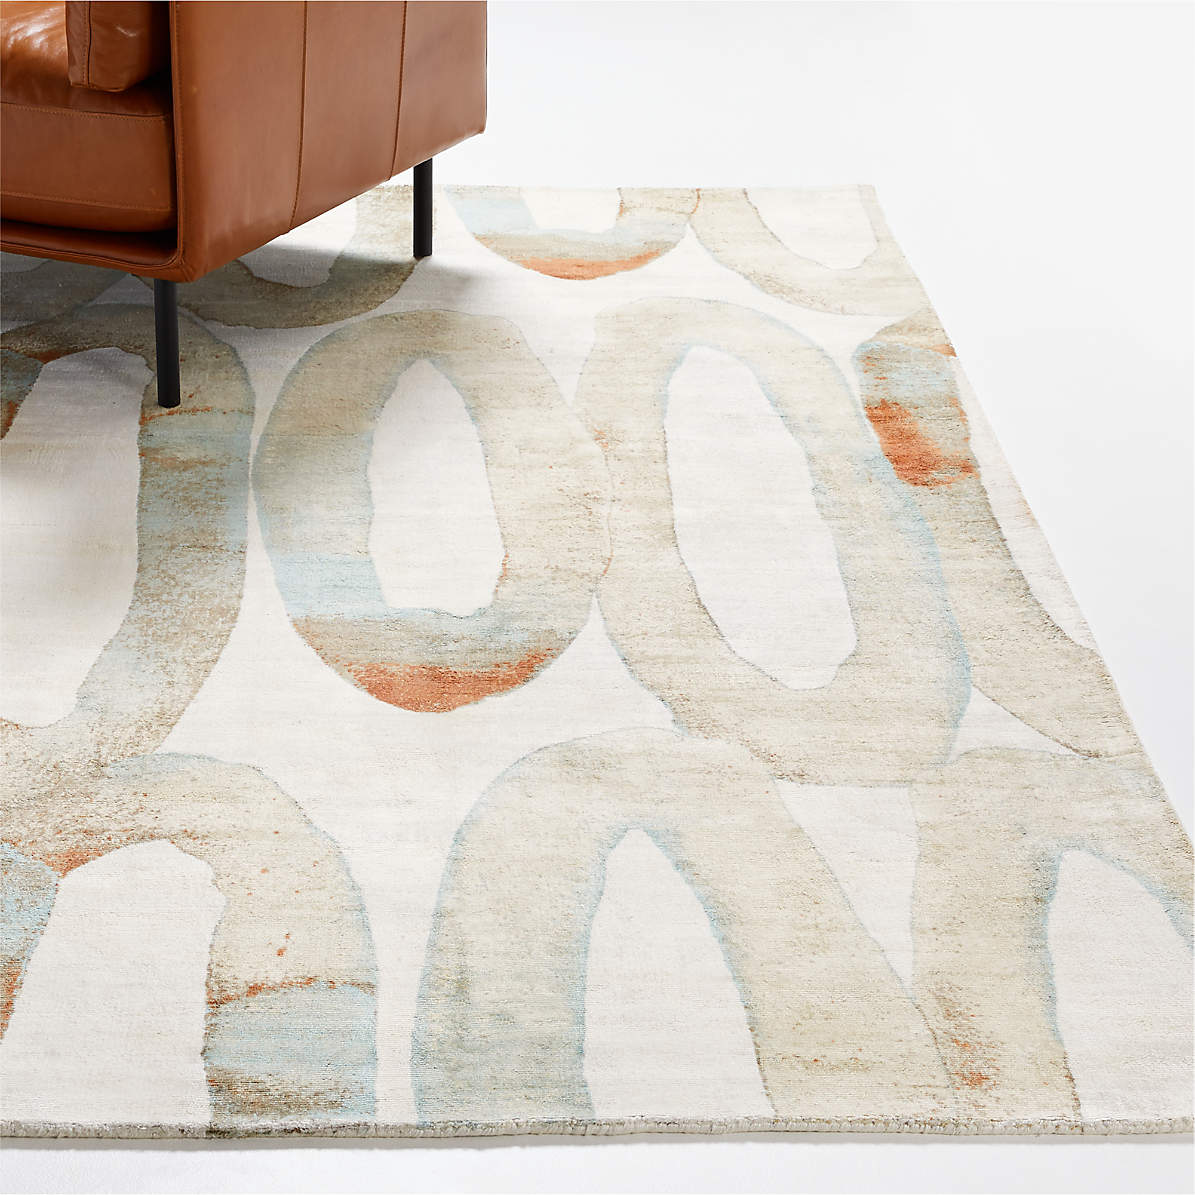 Liotti Watercolor Rug Crate And Barrel, Crate And Barrel Rugs